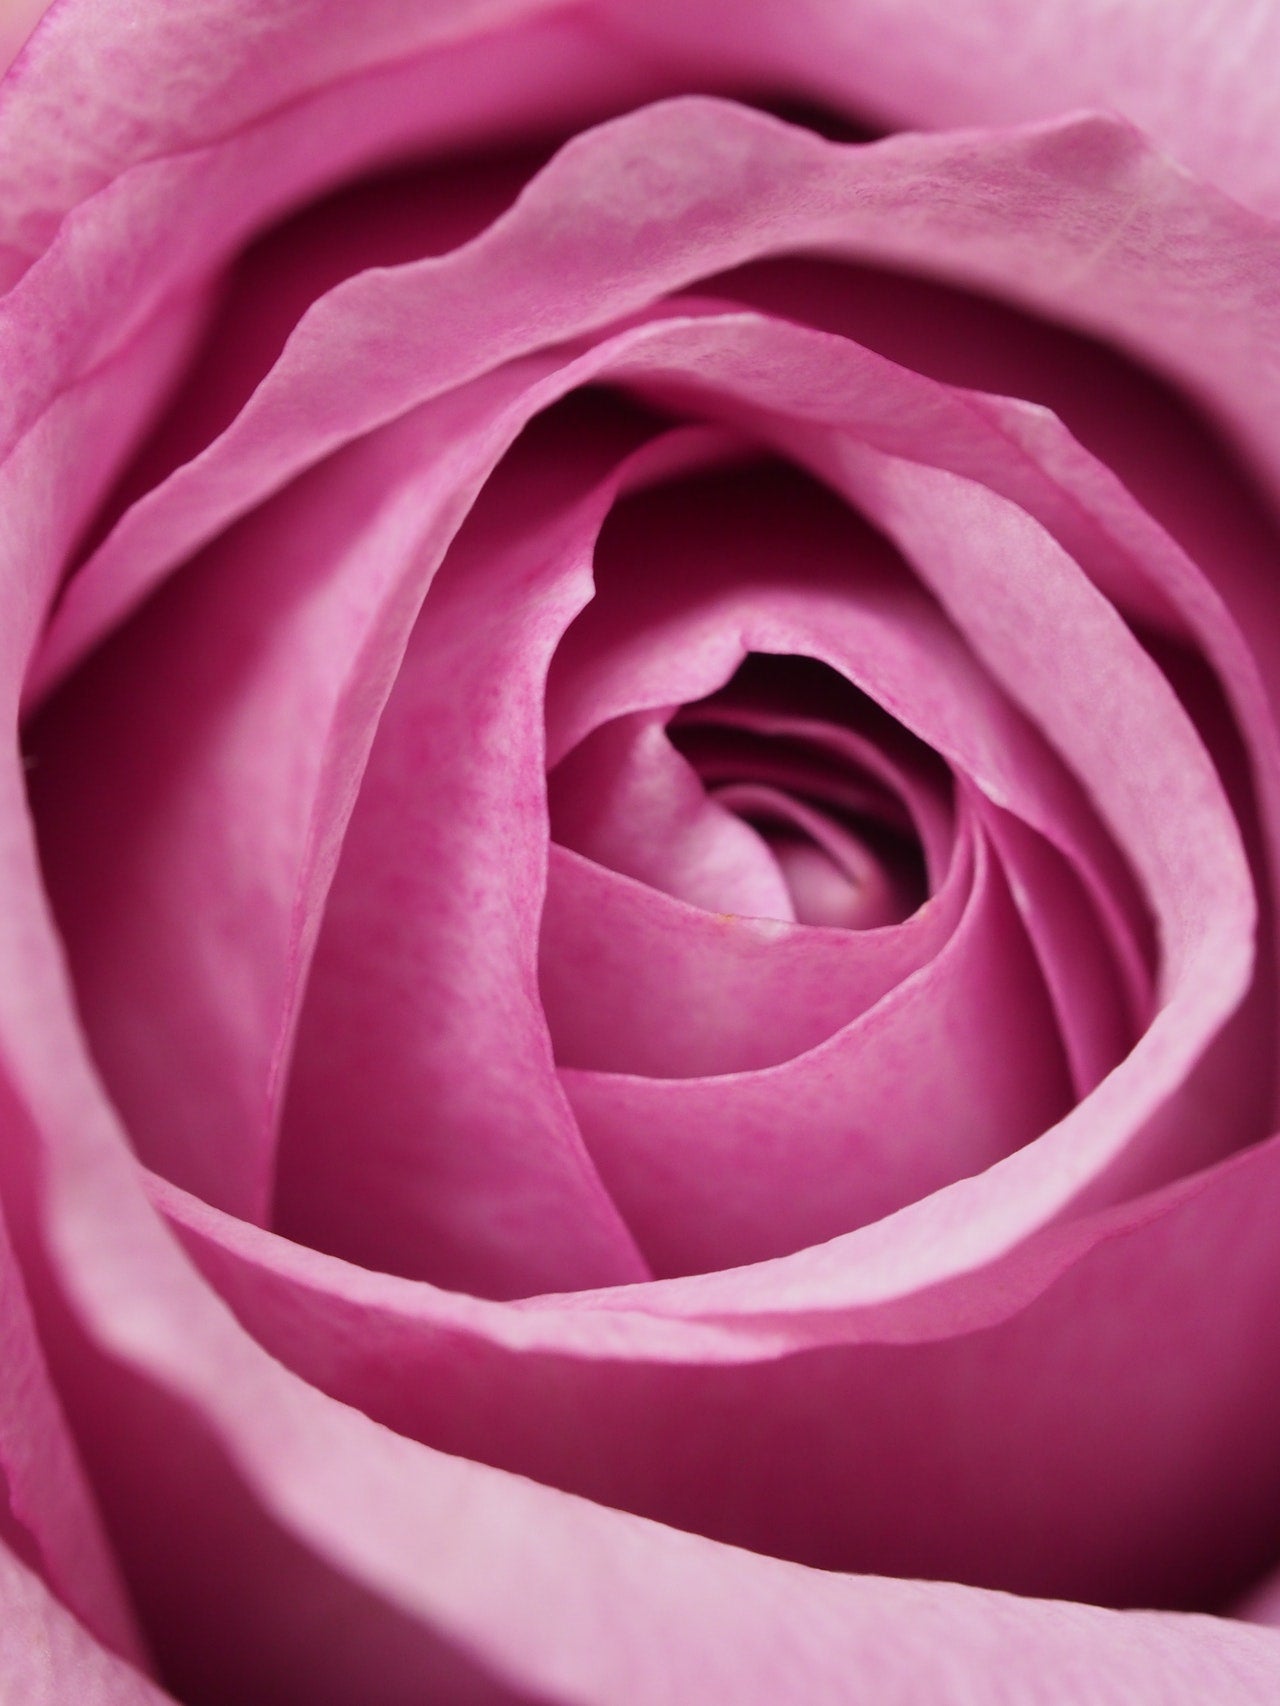 Zoomed in pink rose